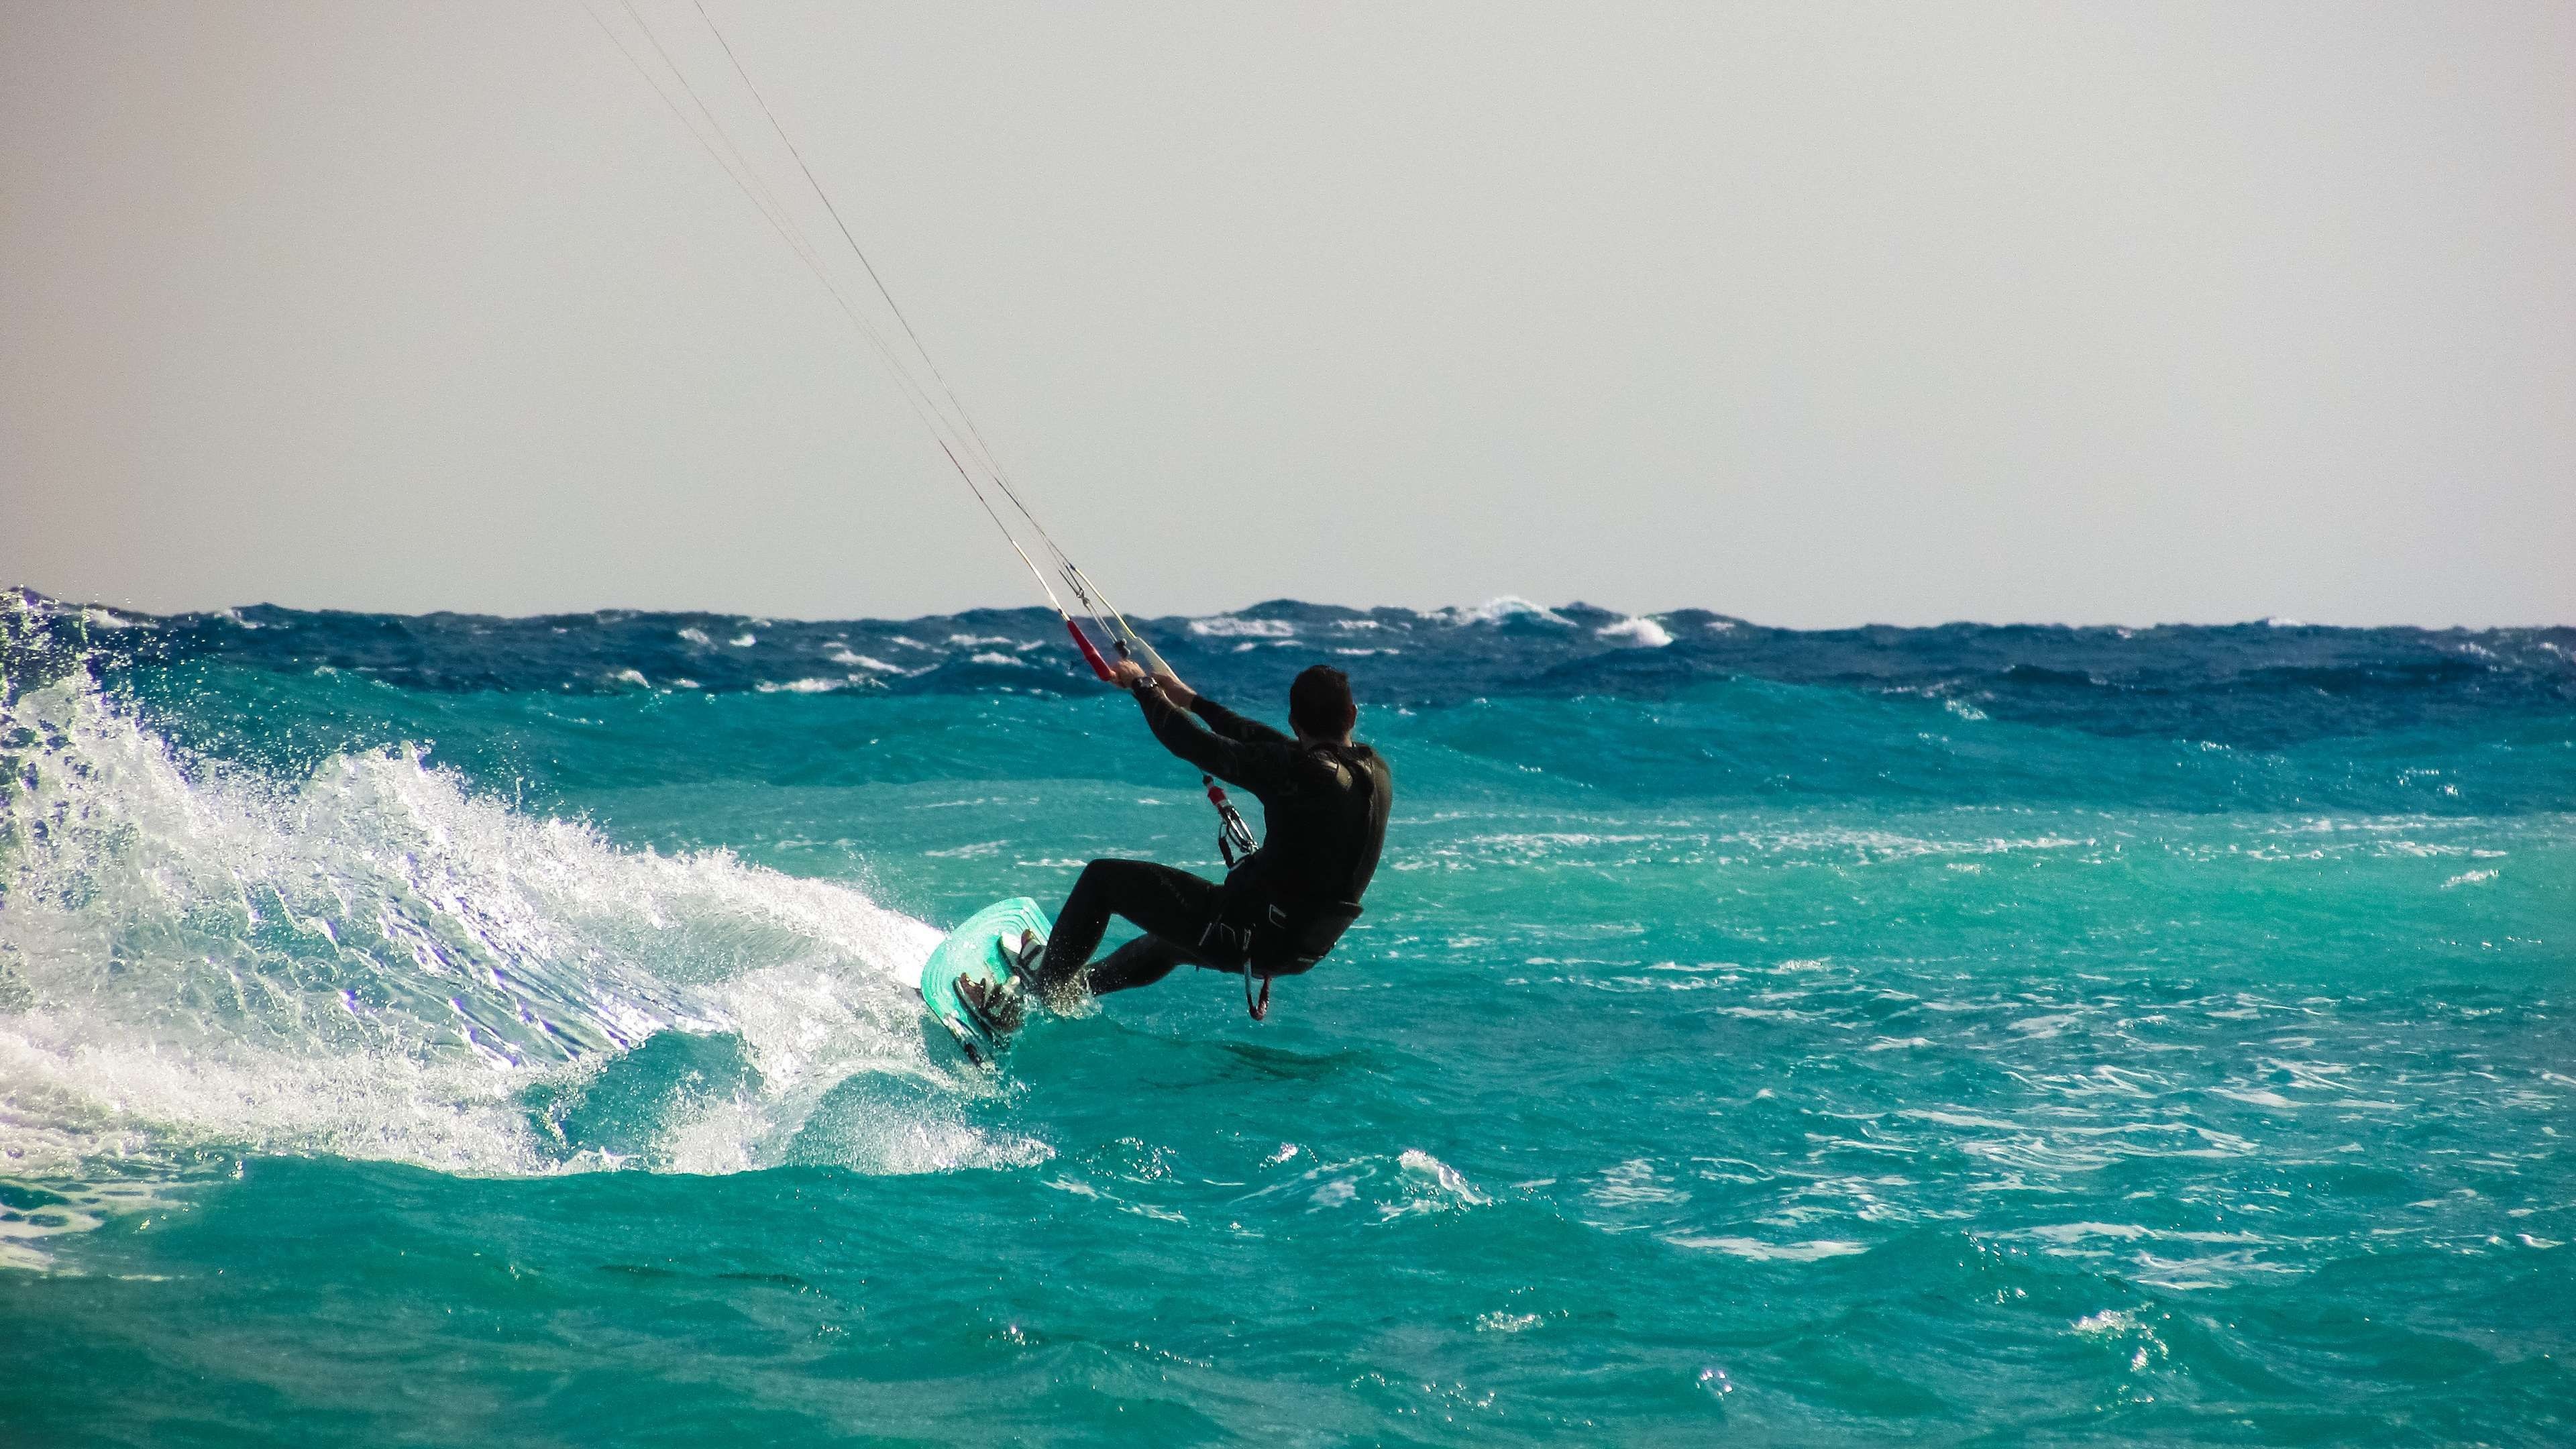 Action-packed kiteboarding, Adrenaline rush, Surfing with the wind, Freedom and fun, 3840x2160 4K Desktop